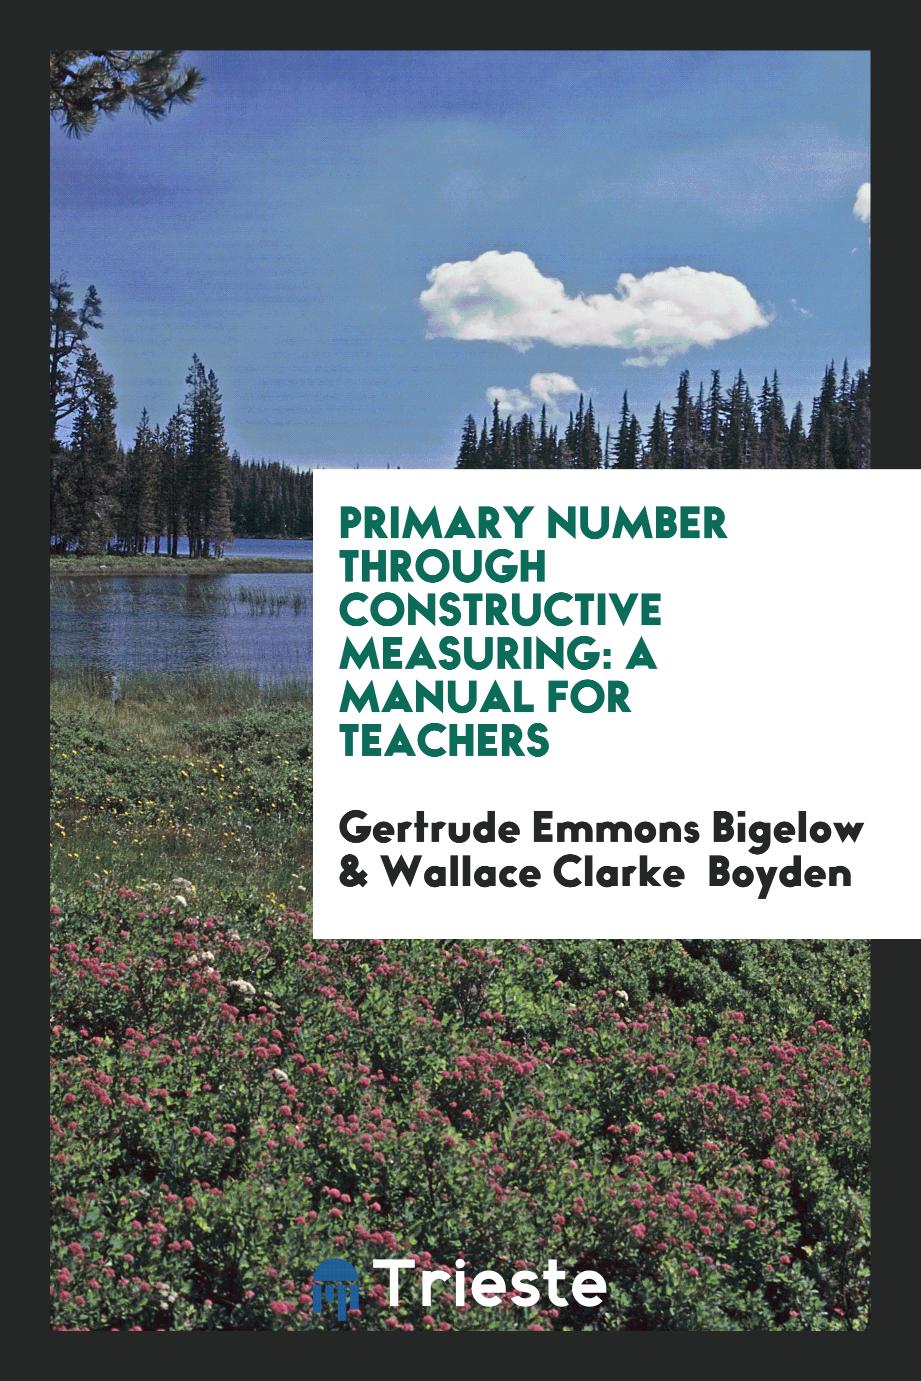 Primary Number Through Constructive Measuring: A Manual for Teachers